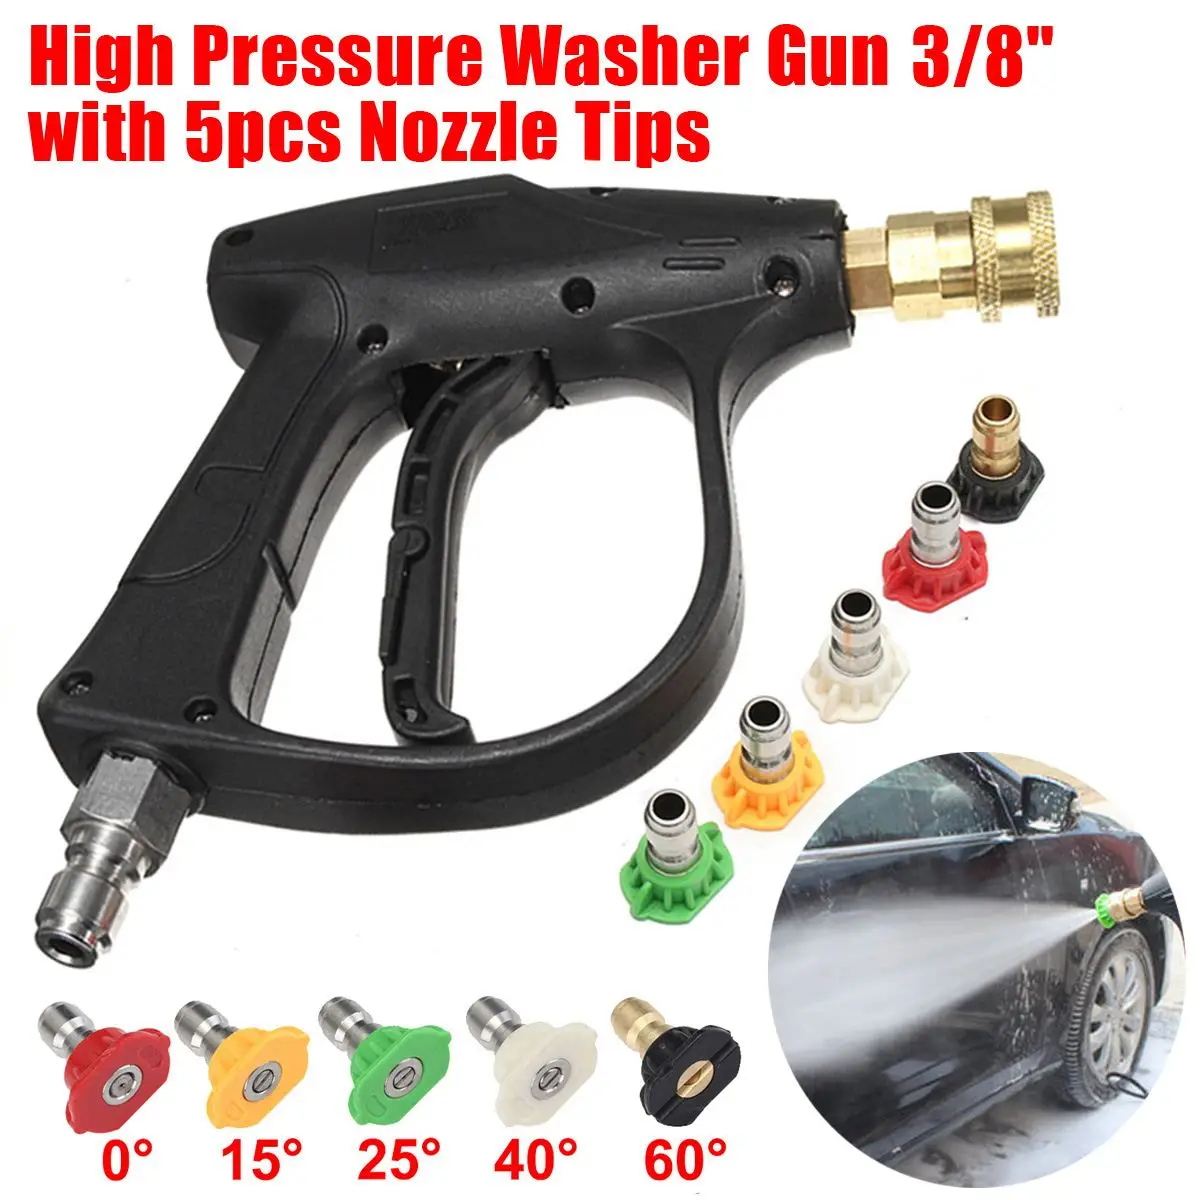 

3000psi High Pressure Washer Water Guns 3/8" 1/4" Quick Connect Adapter with 5 Nozzle Tips Spray Pot for Karcher Car Washing